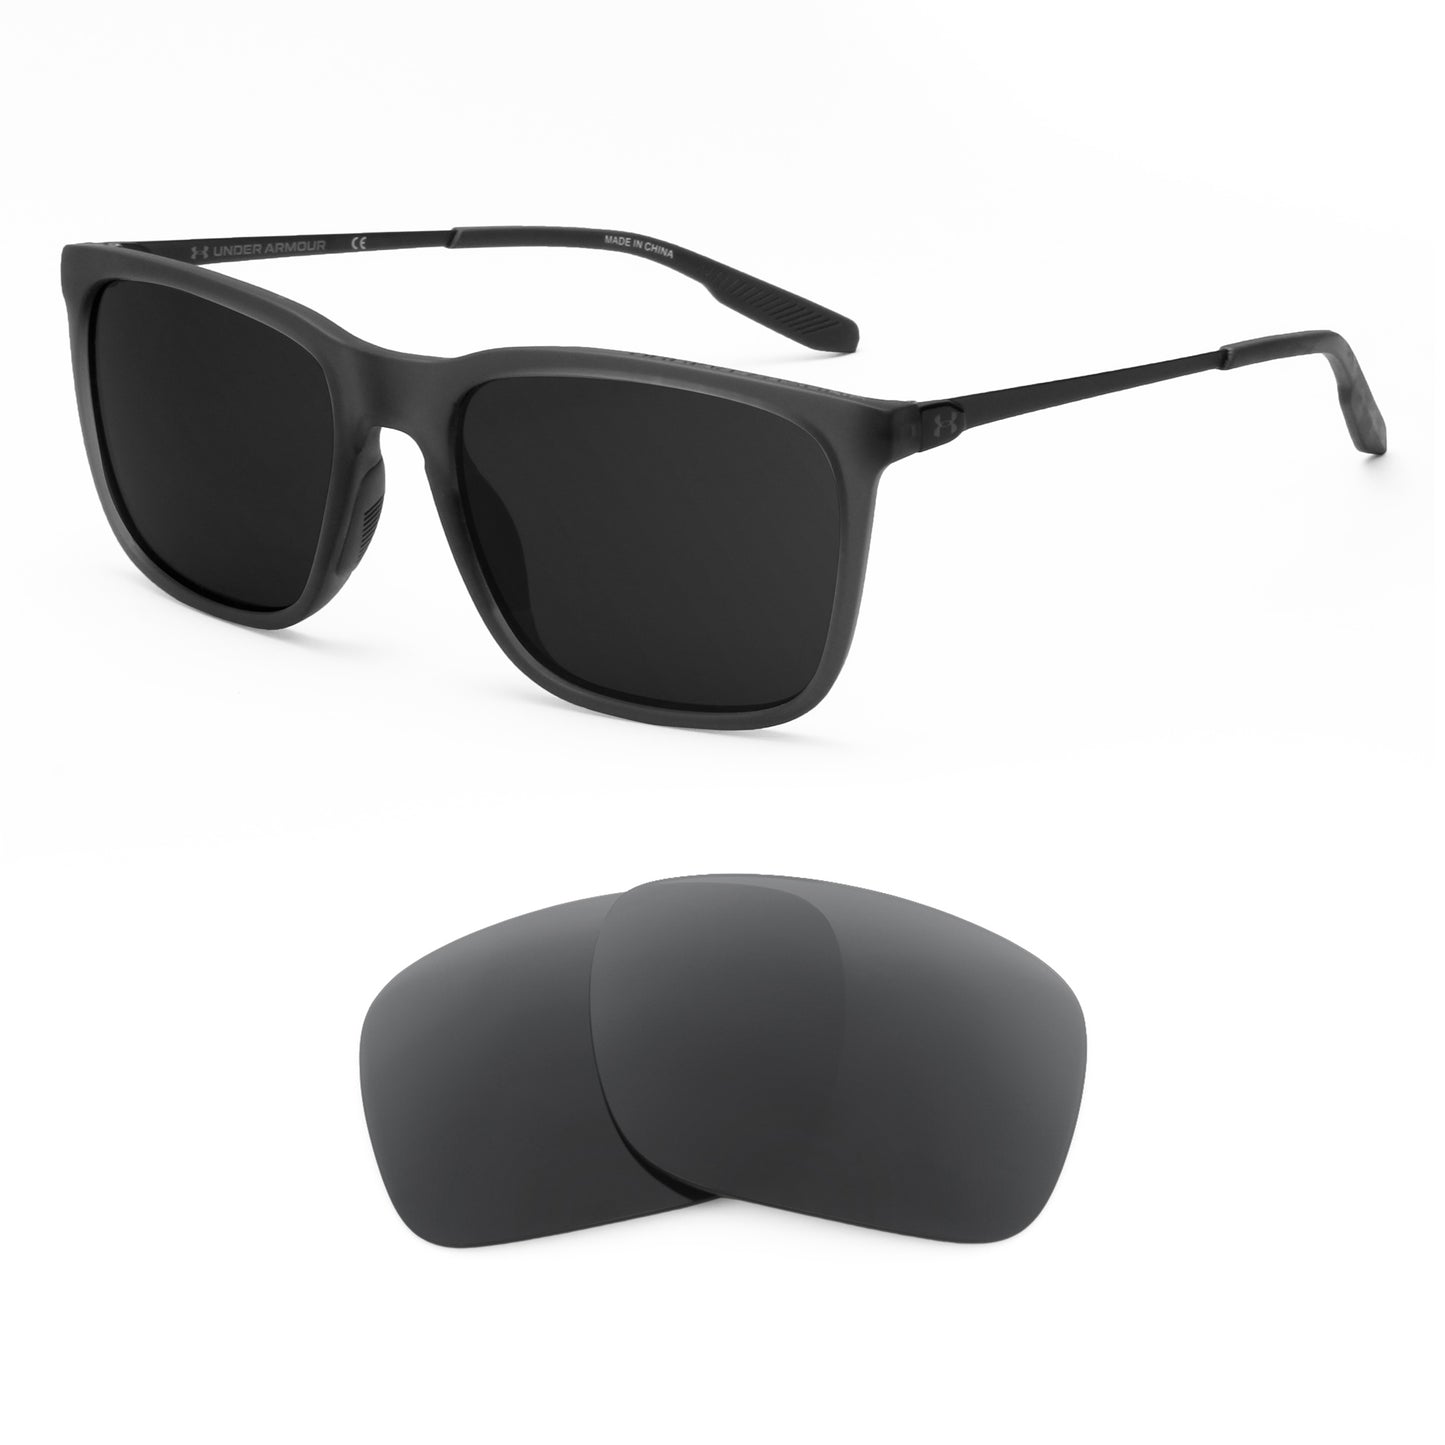 Under Armour Reliance sunglasses with replacement lenses